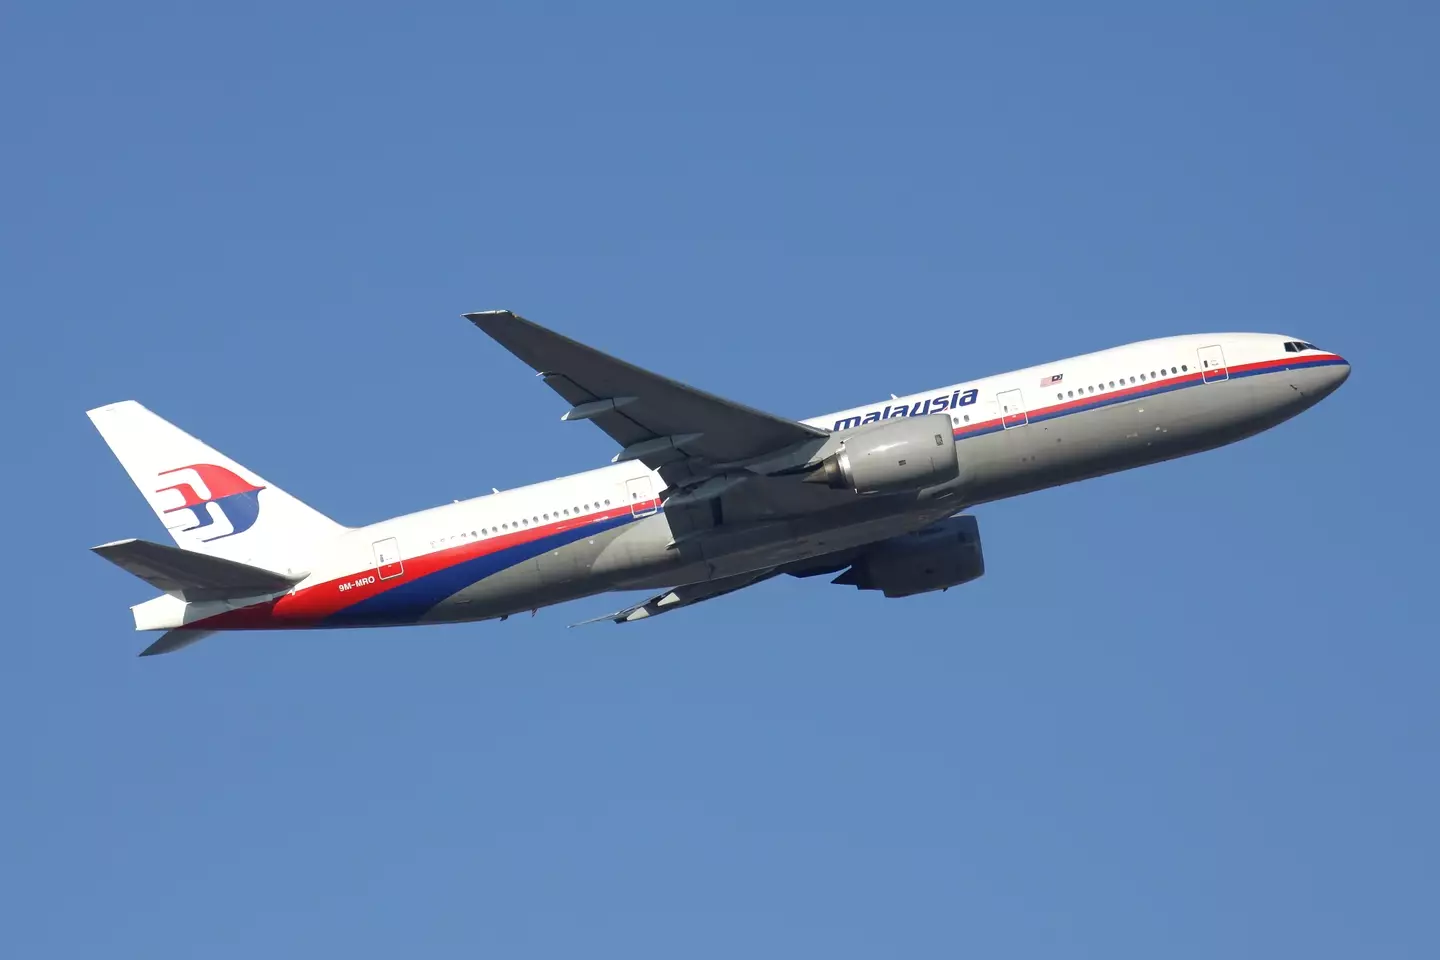 Flight MH370 before it disappeared.